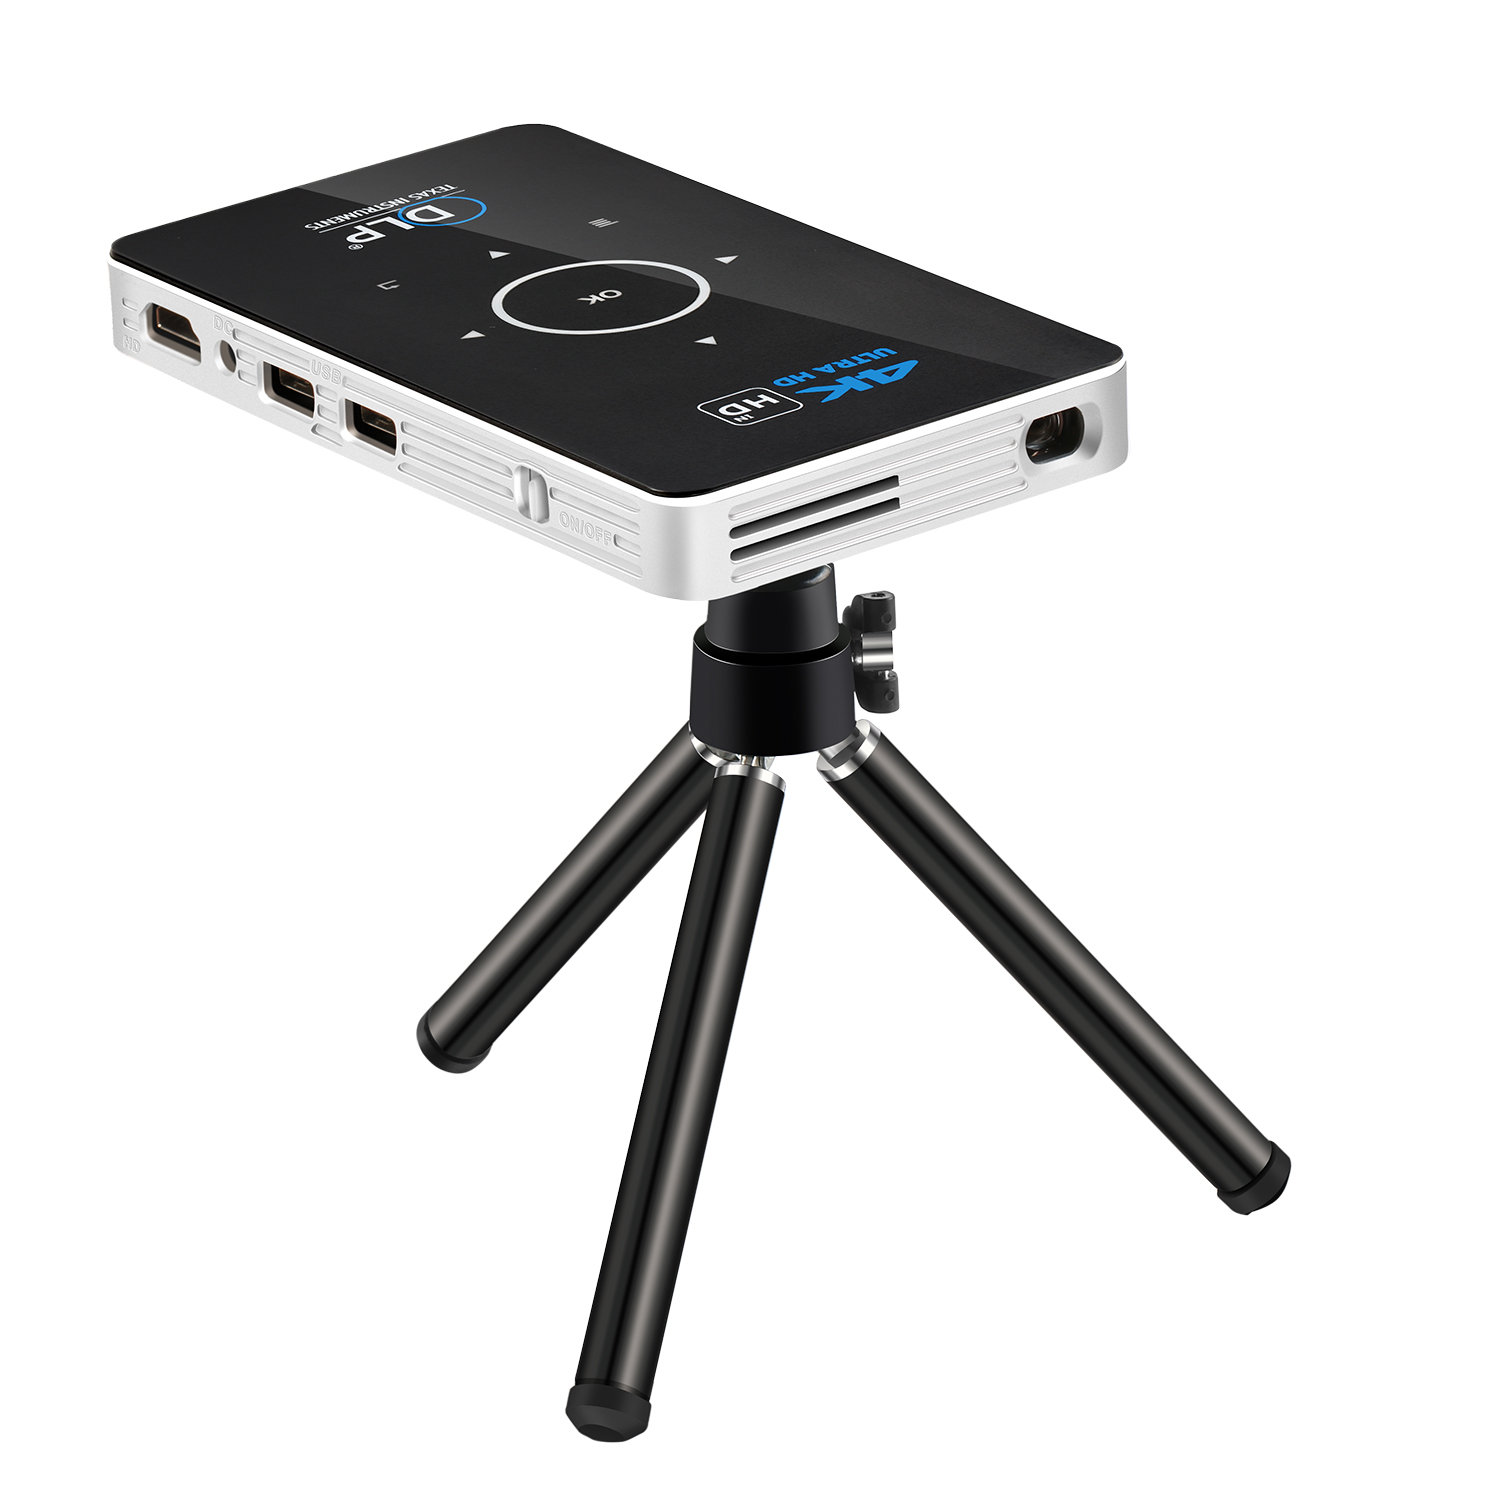 Enjoyable P6 Mini Projector DLP Android 9.0 WiFi Wireless Portable Movie Home Cinema For Smartphone Miracast Airplay